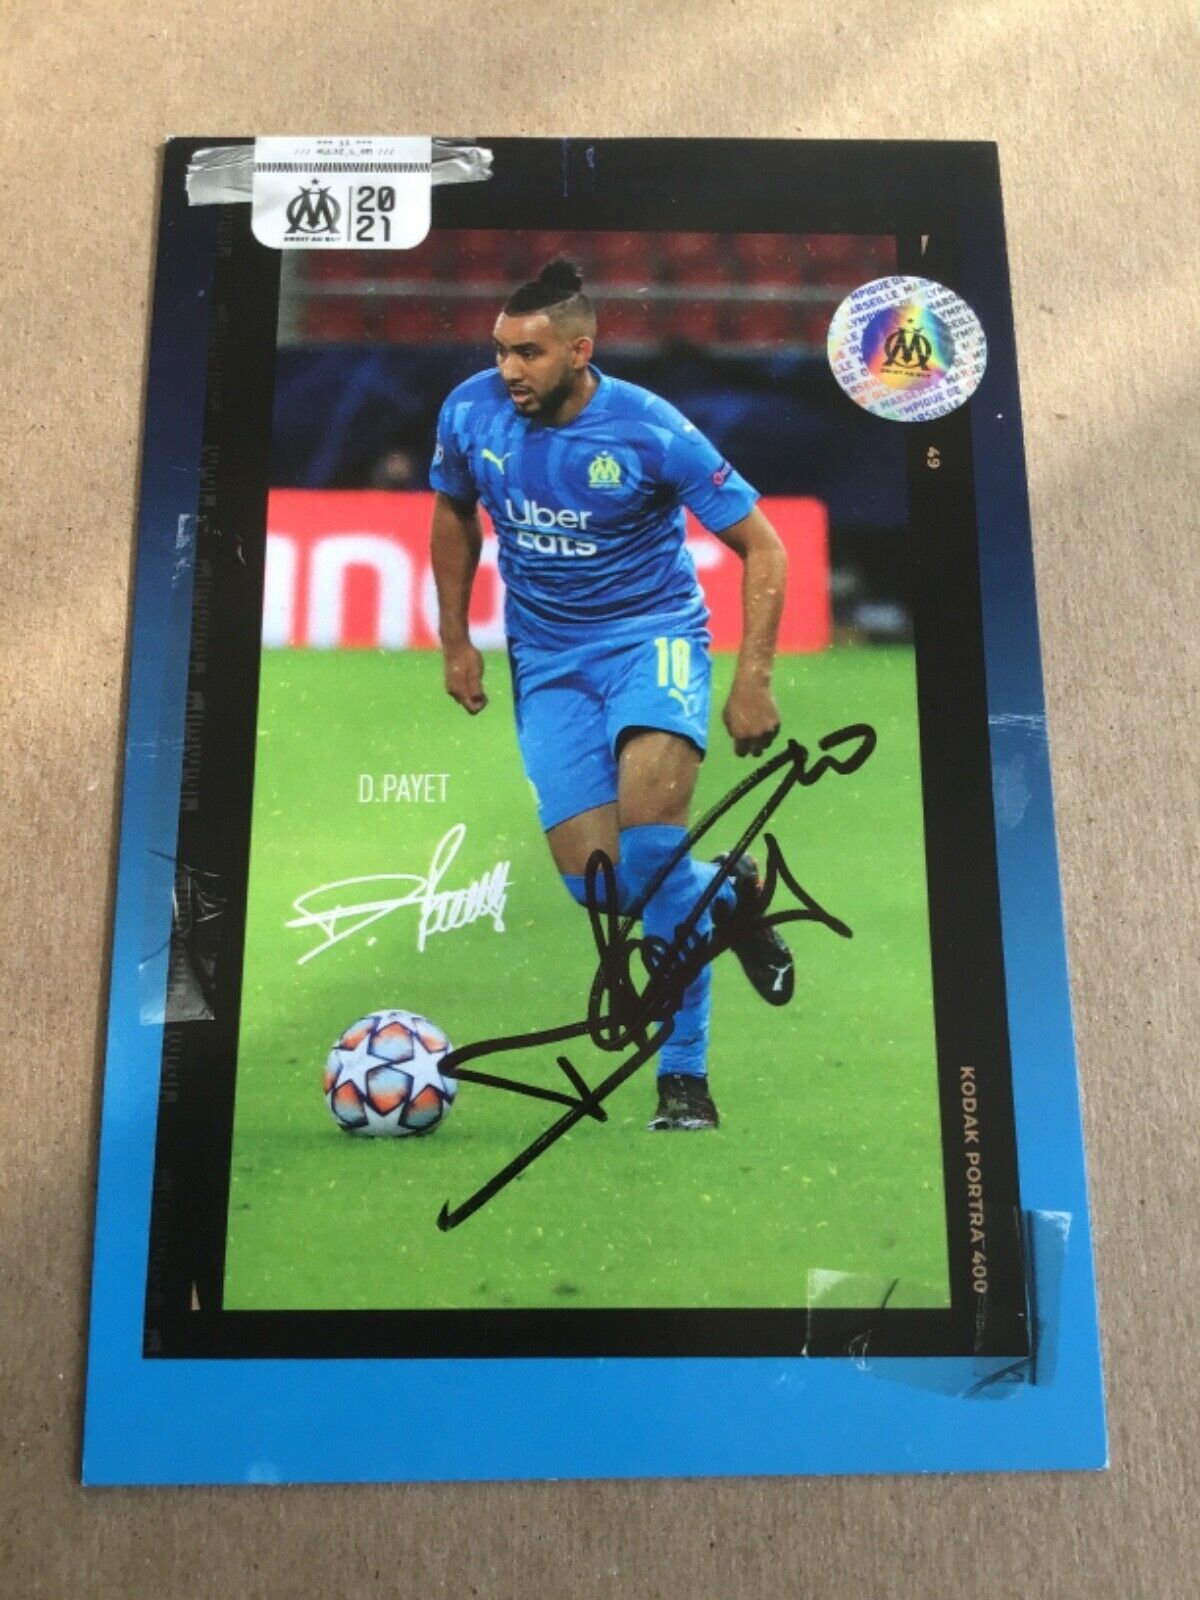 Dimitri Payet, France 🇫🇷 Olympique Marseille 2020/21 signed card 4x6